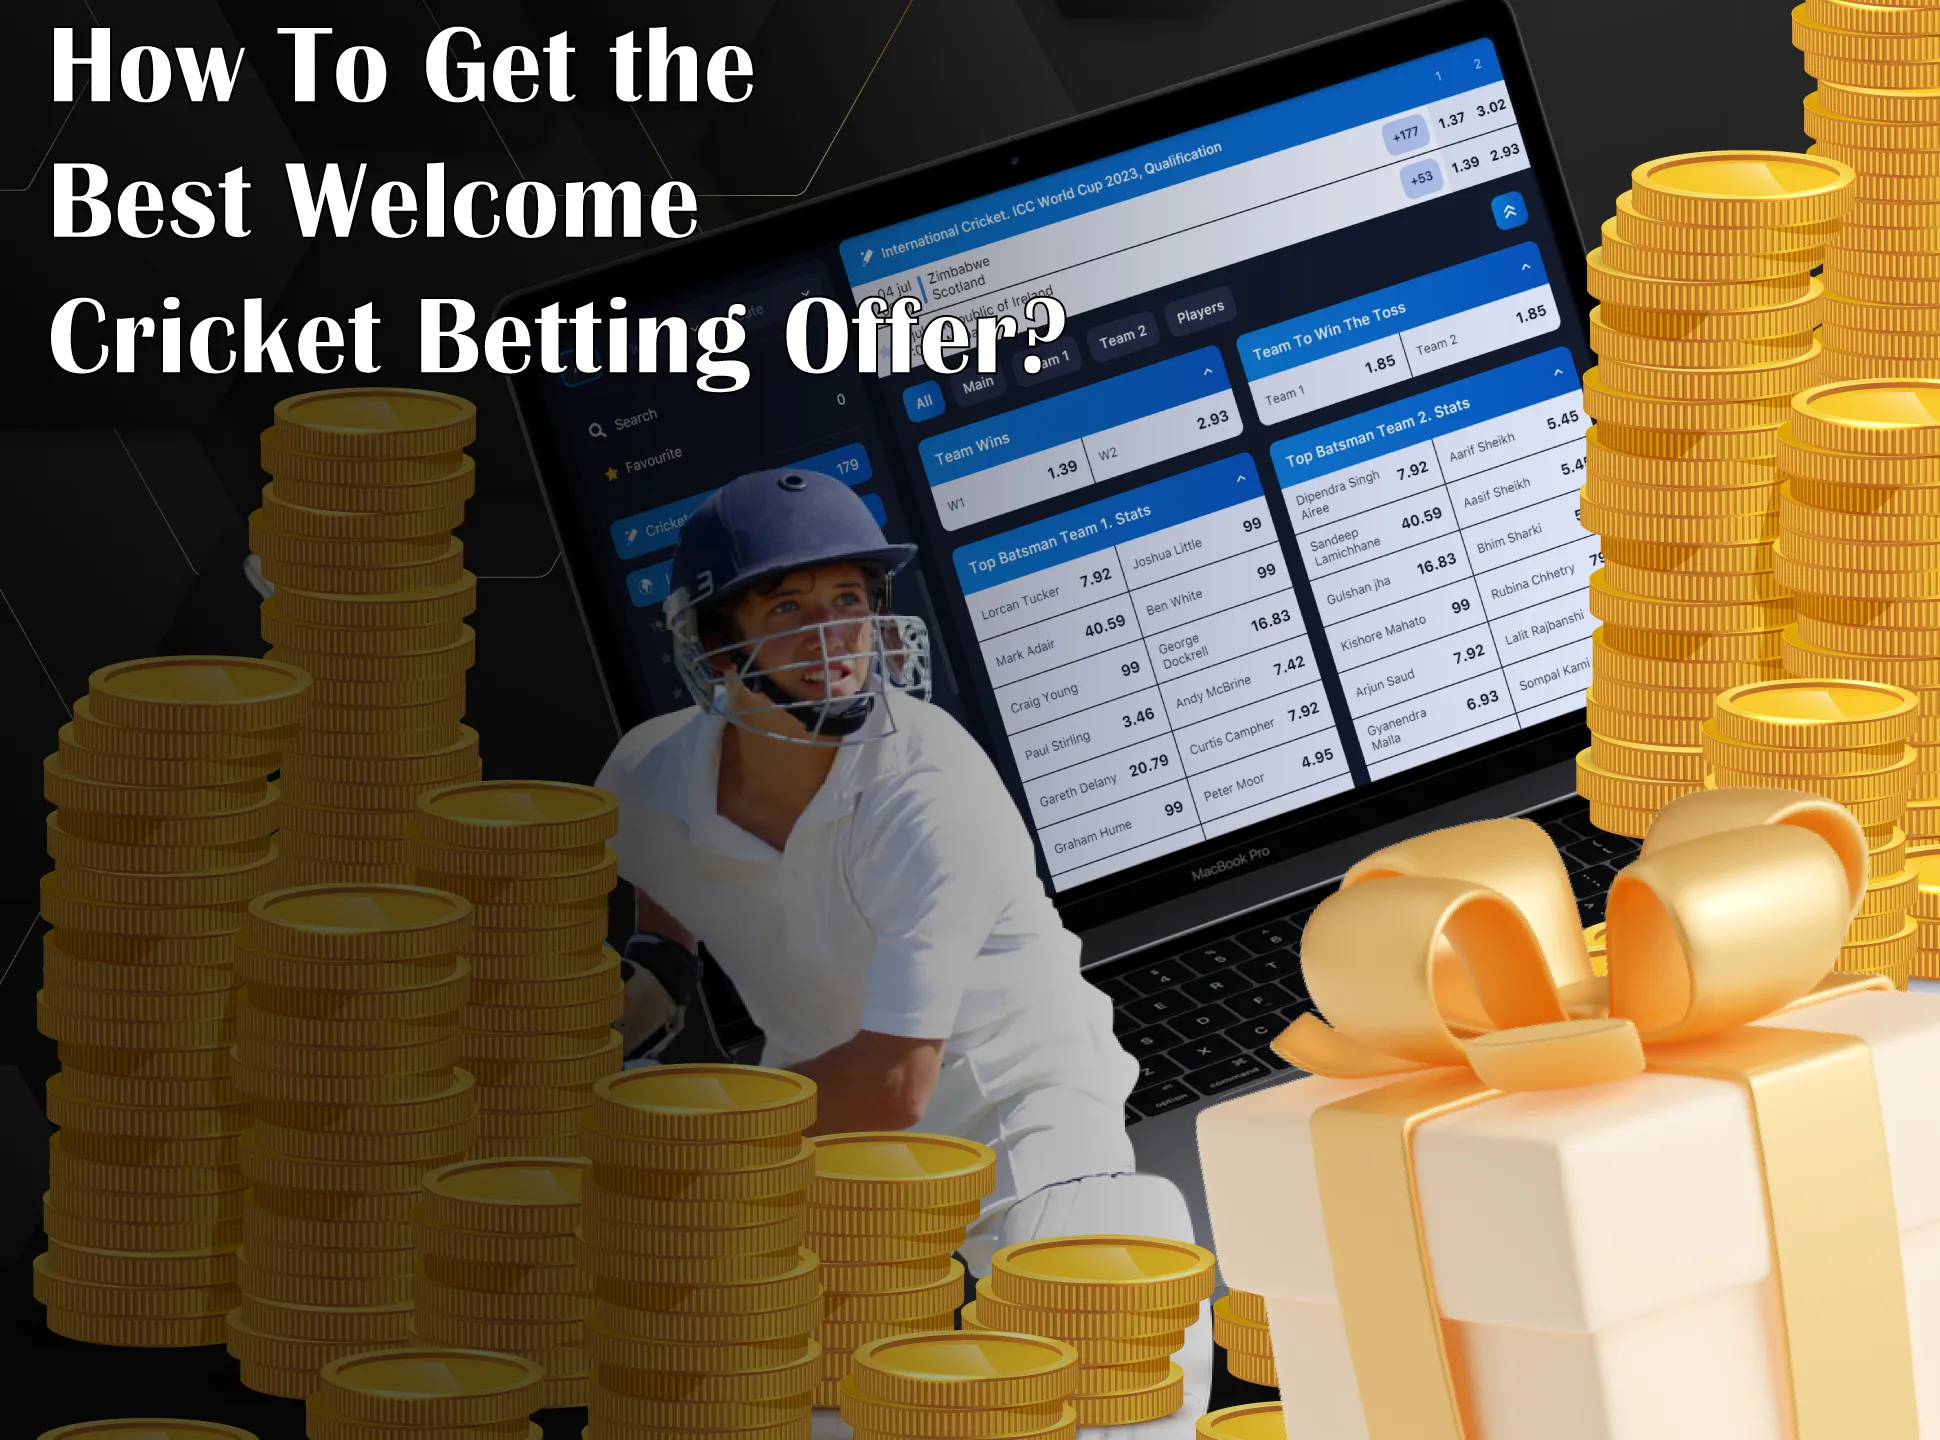 Go to the betting site, sign up for it, choose the bonus type and tip up your account to get a bonus.